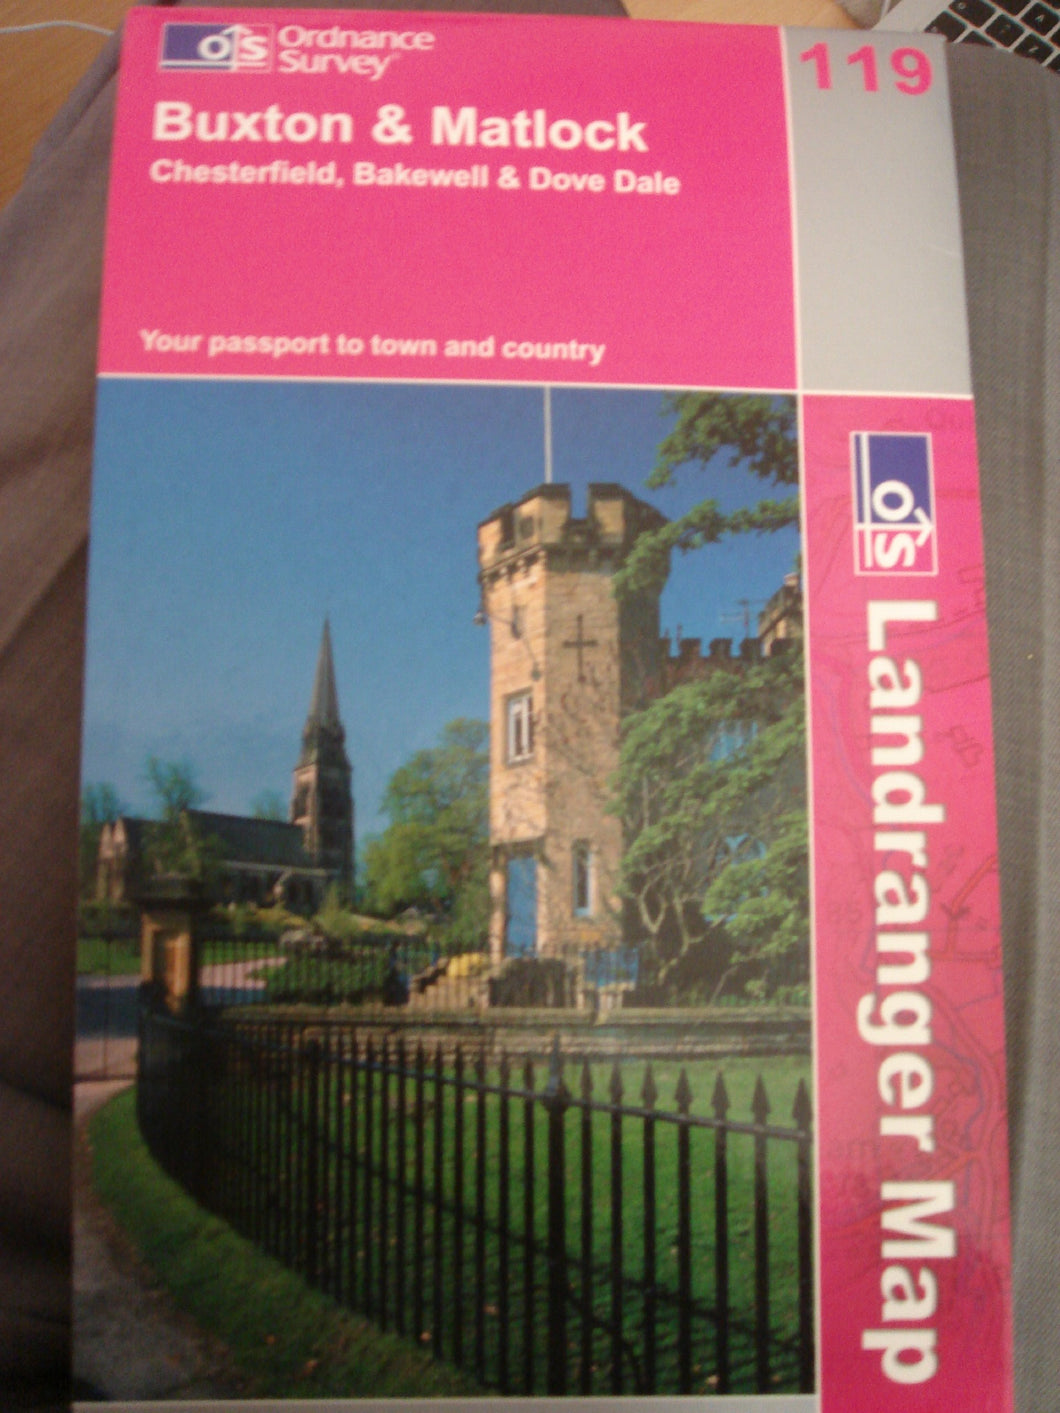 Buxton and Matlock: Chesterfield, Bakewell and Dove Dale (Landranger Maps) Ordnance Survey